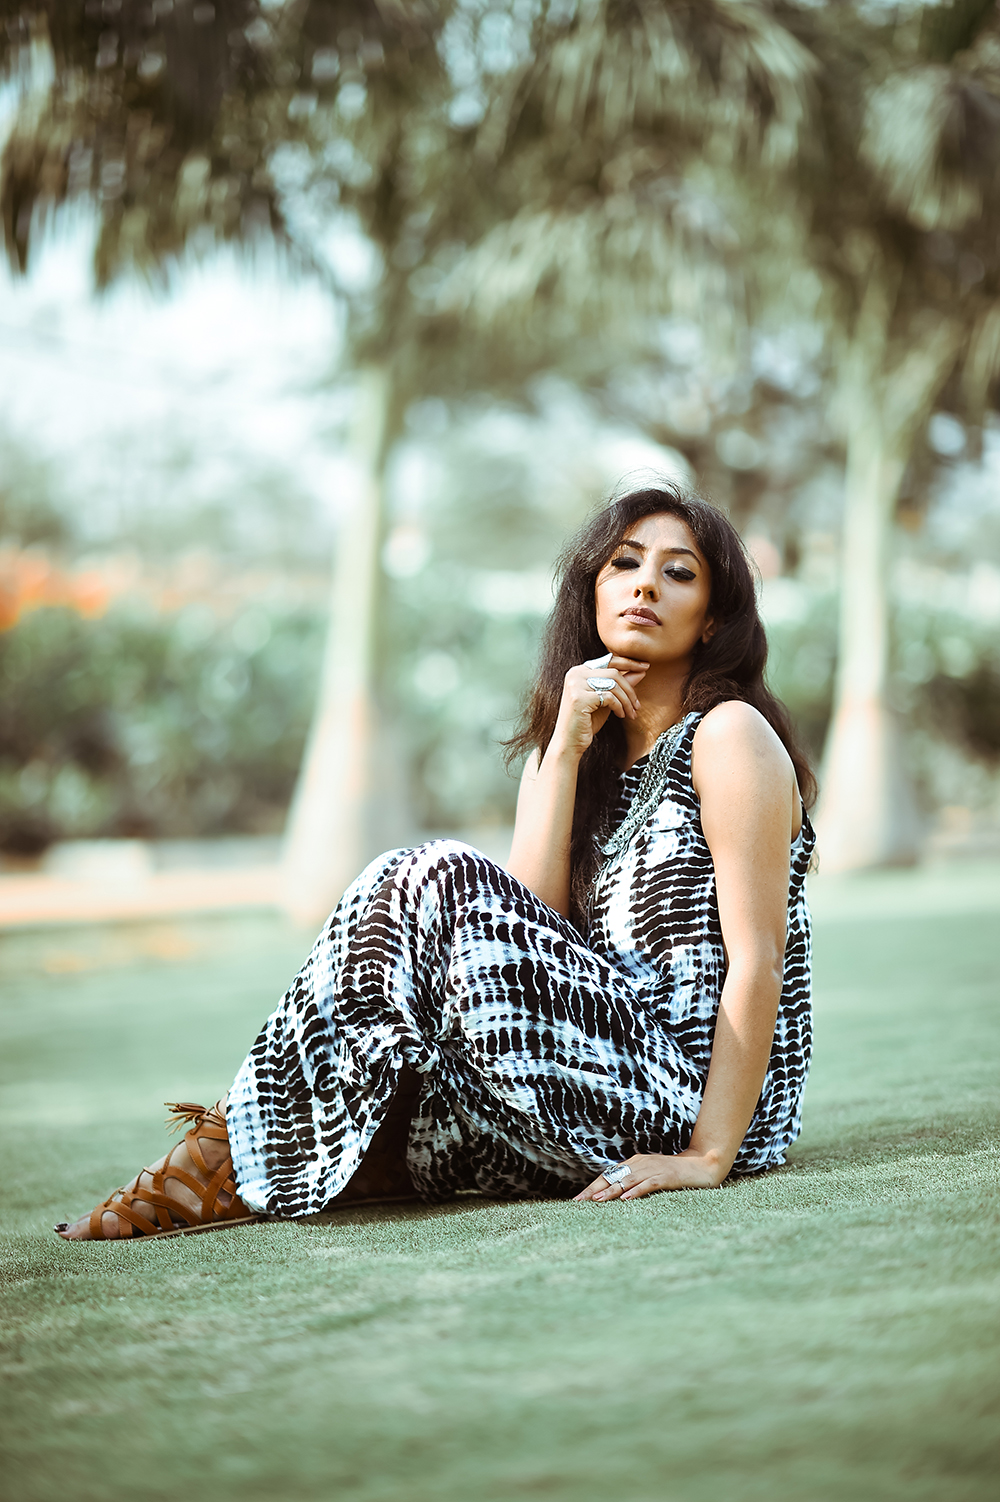 Lookbook ; Bohemian ; Dress ; Maxi ; Tie Dye ; Outfit ; Tan ; Gladiators ; Tribal Necklace ; fashion photography ; palm trees ; resort wear ; Roving Mode ; dusk ; editorial ; strong ; Dark ; summer fashion ; summer outfit ; spring ; summer 17 boho look ; Naznin ; Naznin Suhaer ; dusky; model ; indian blogger ; hyderabad fashion bloggers ; hyderabad bloggers ; hyderabad fashion blogger ; I Dress for the Applause ; 